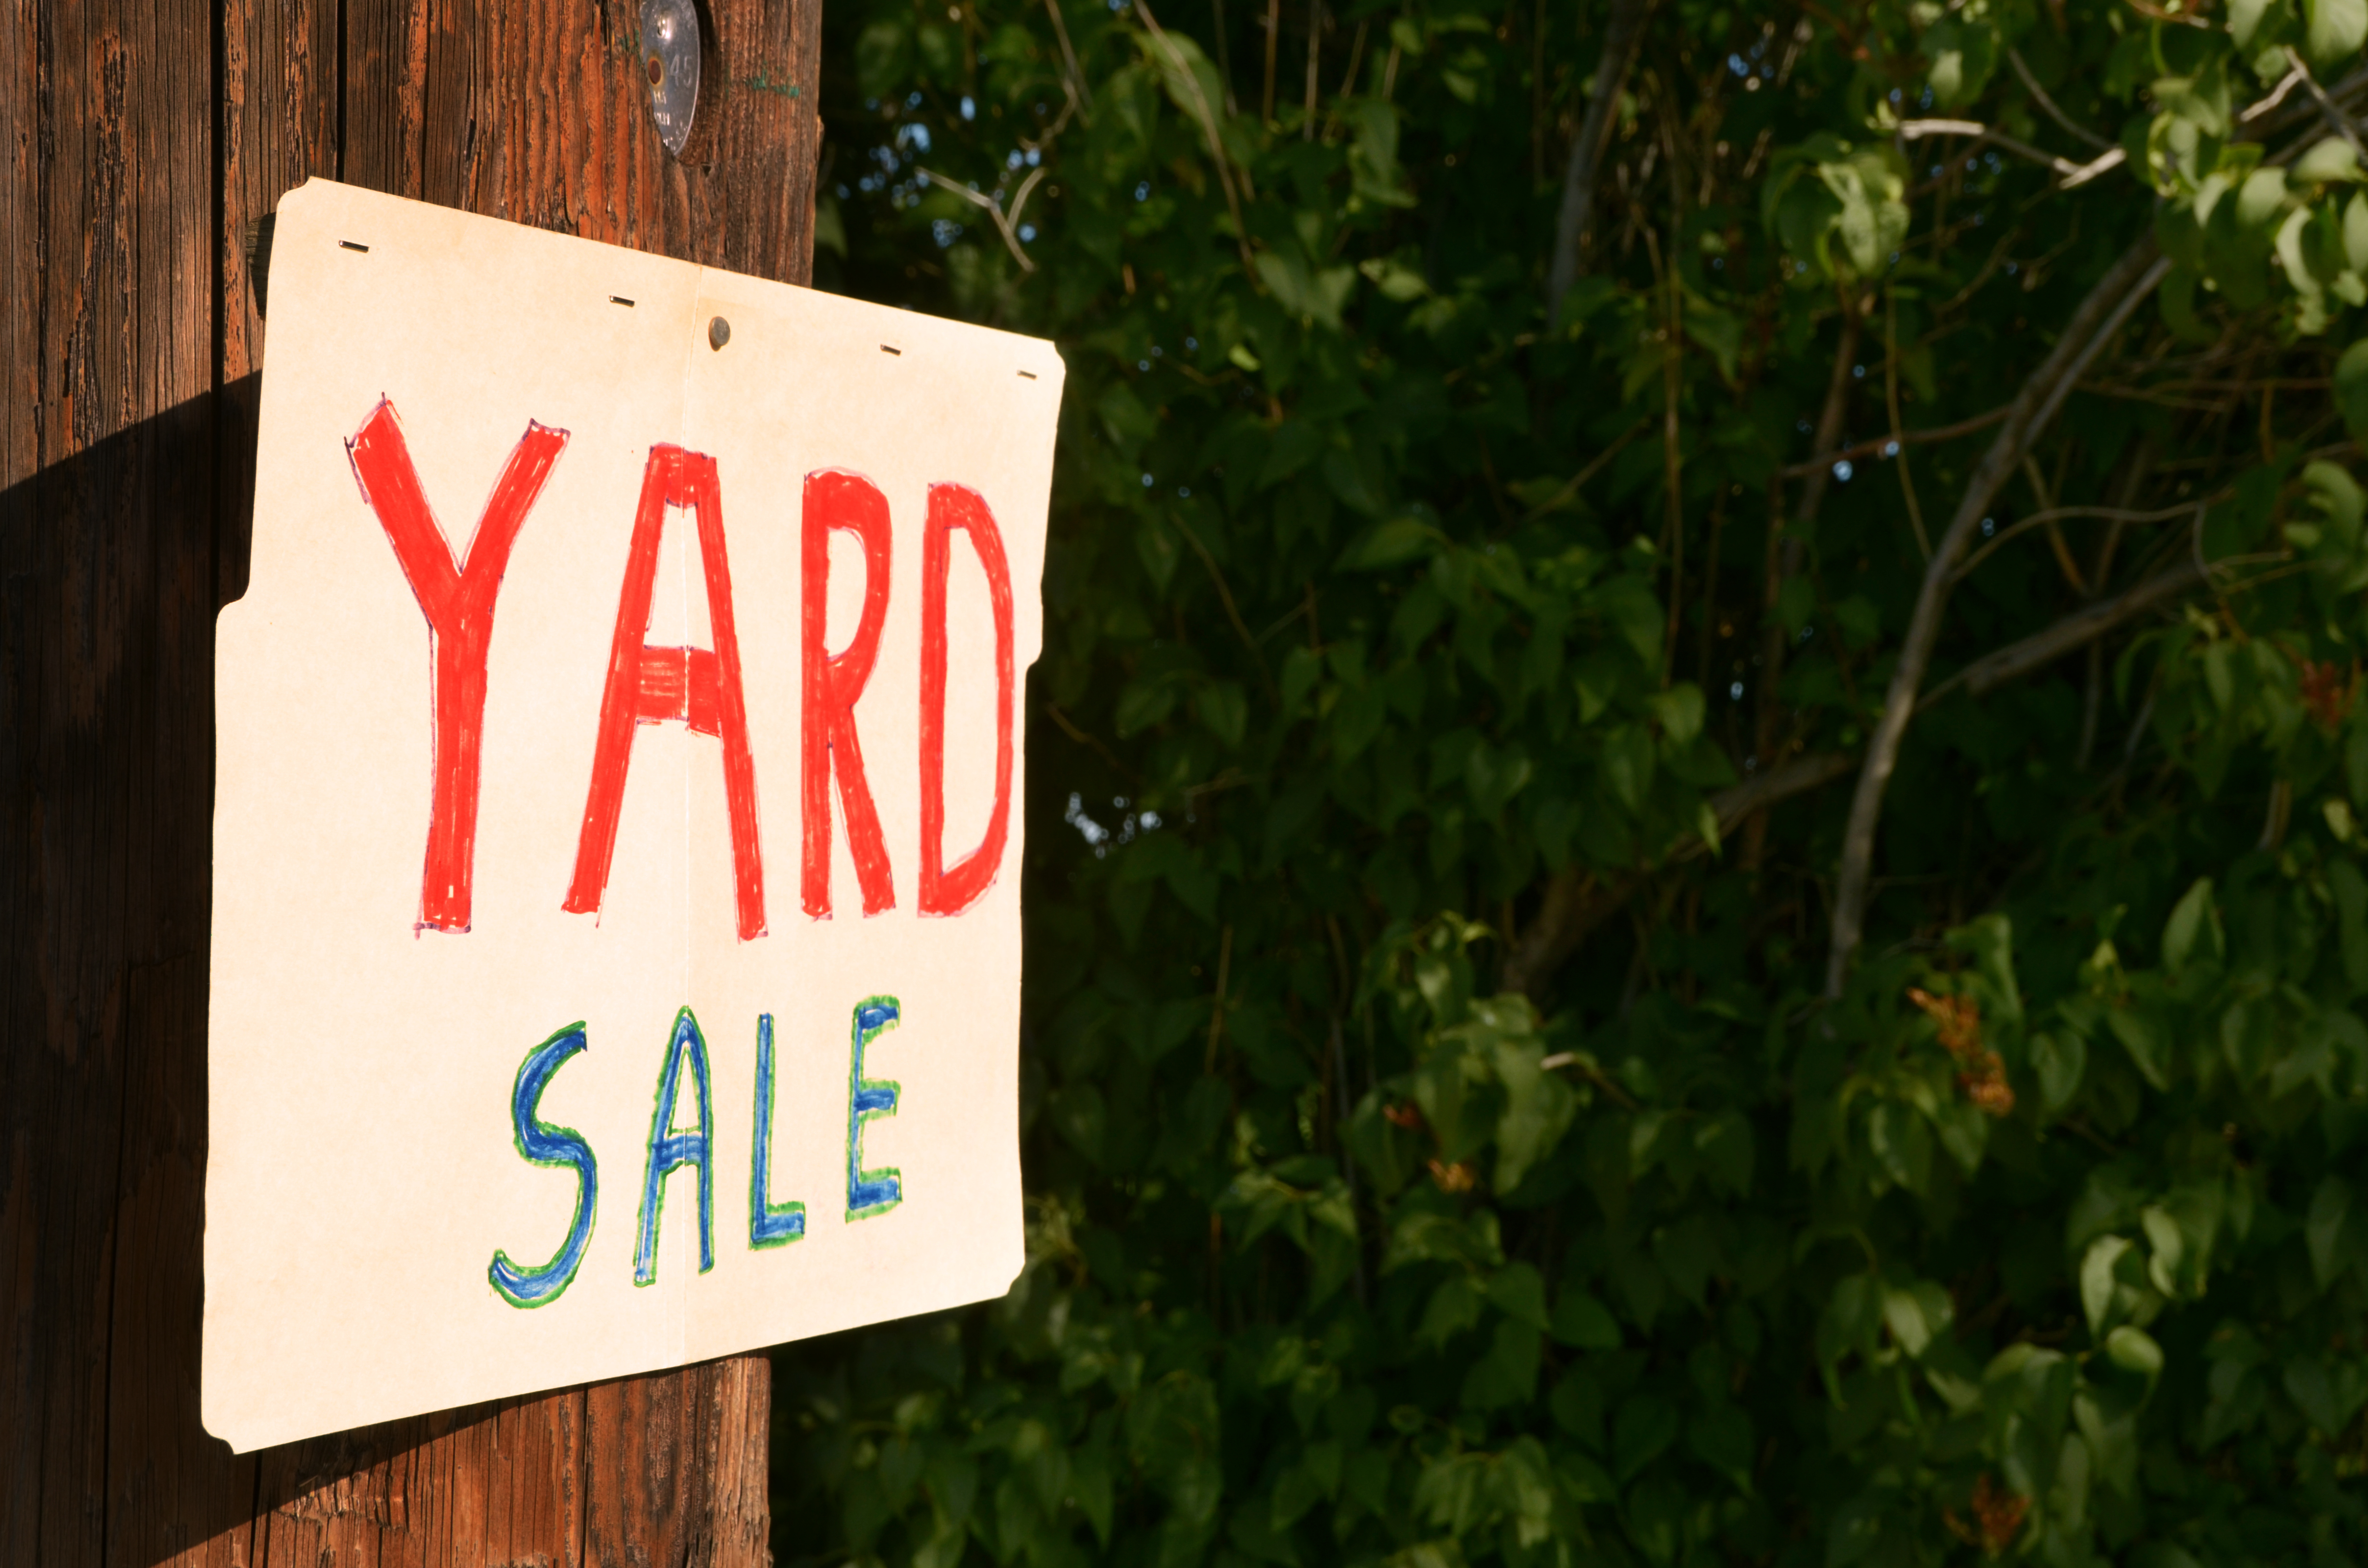 3 Ways to Buy & Sell Locally That Do Not Involve Craigslist